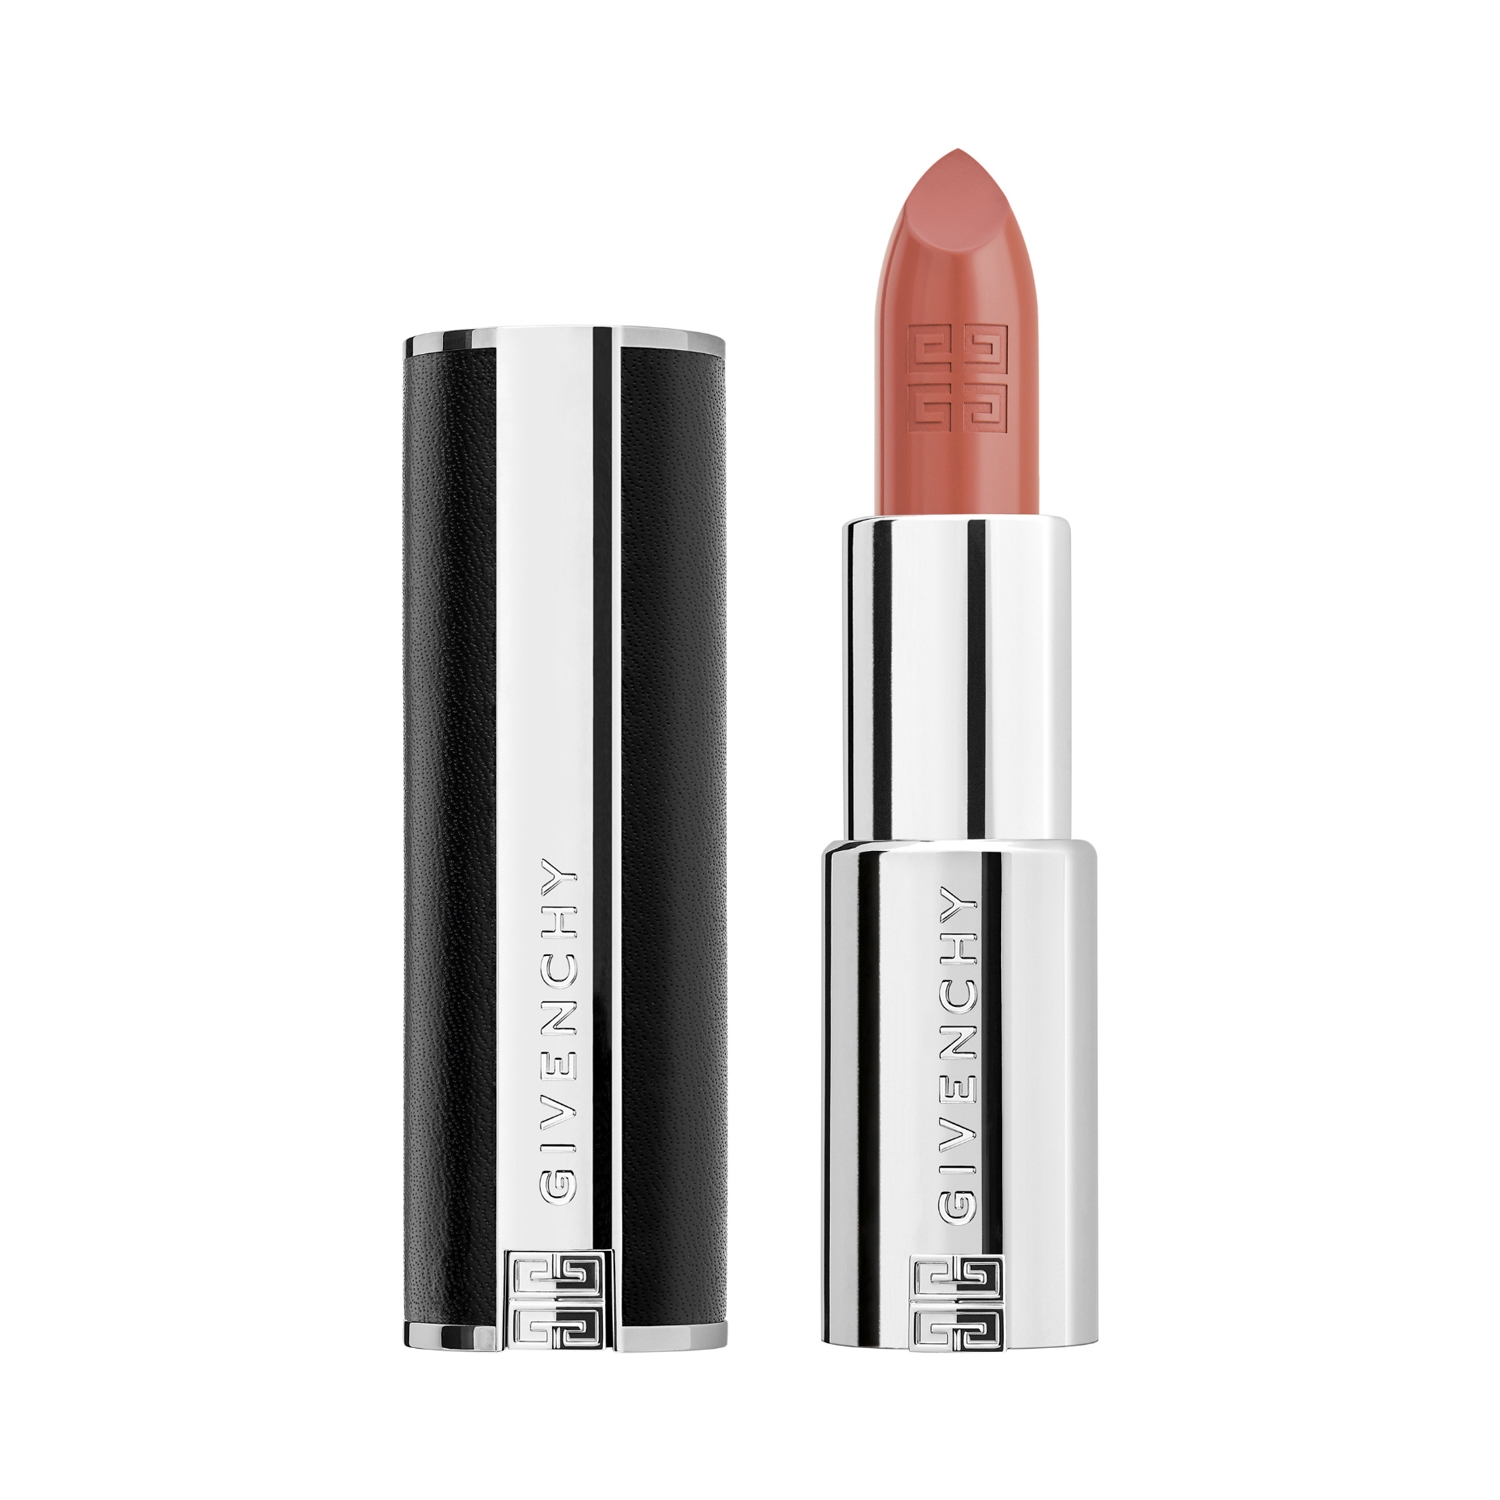 Givenchy | Givenchy Le Rouge Interdit Intense Silk Lipstick - N 109 Beige Sable​ (3.4g)